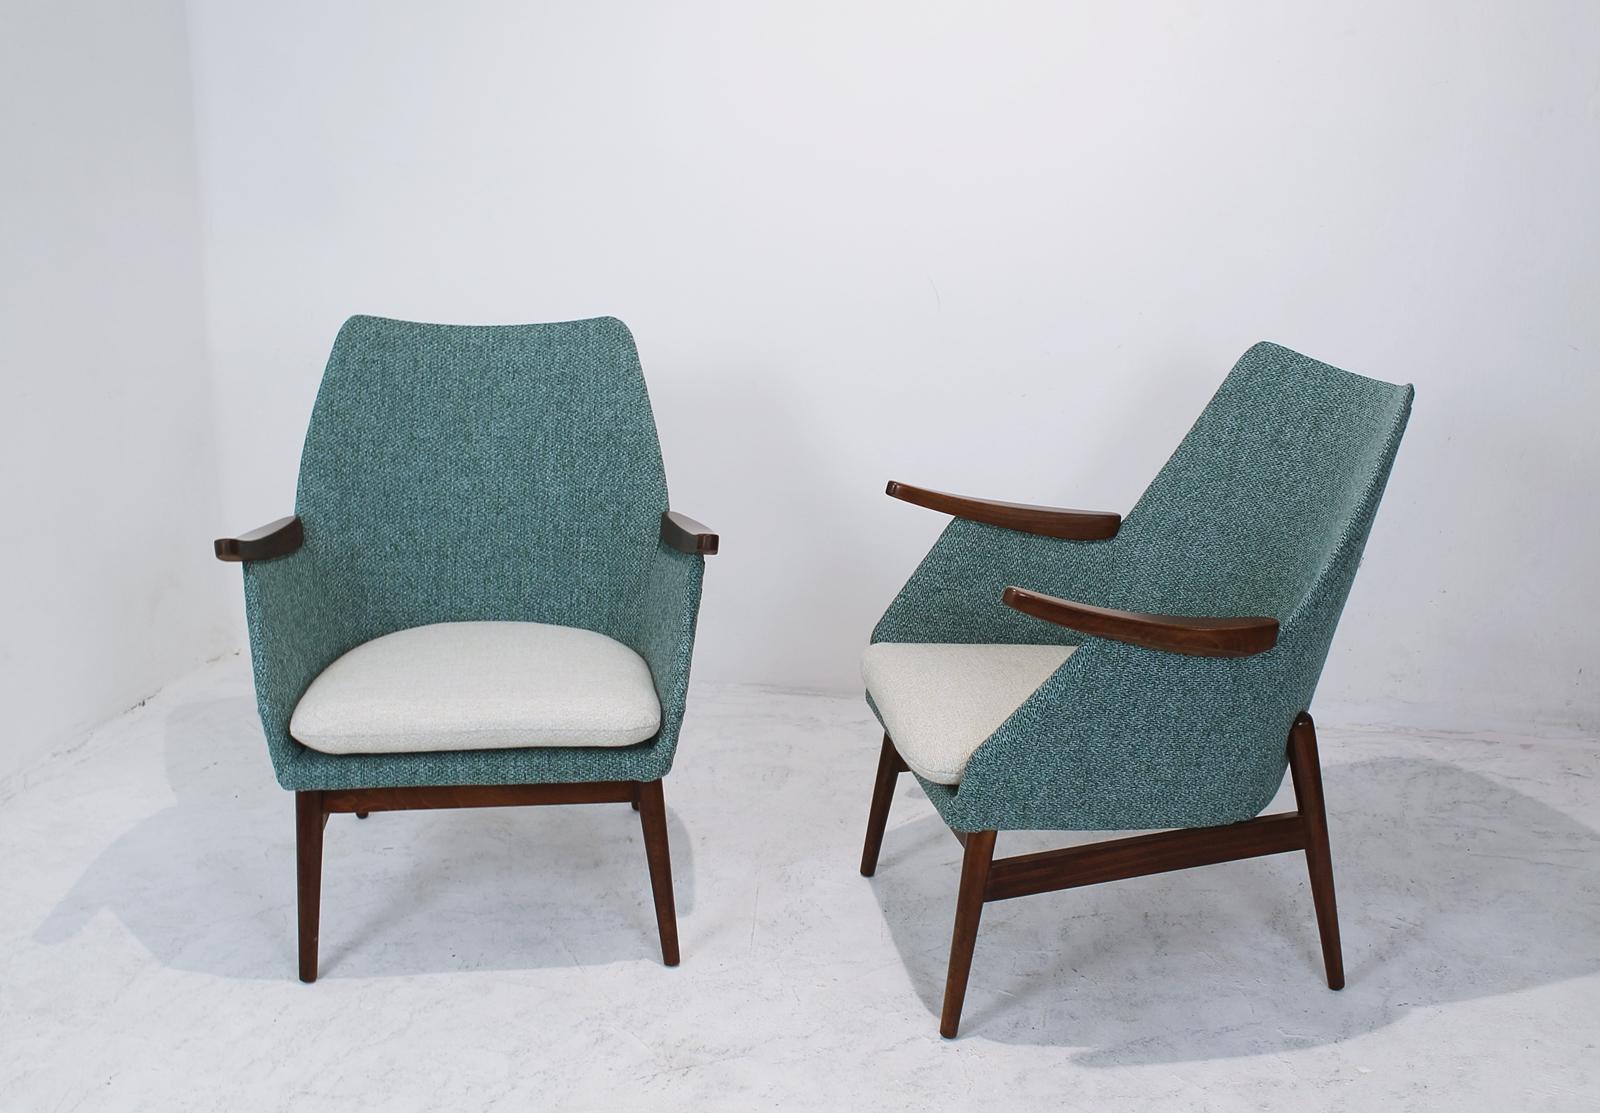 1960s vintage Hungarian cocktail chairs, totally refurbished .

This pair of midcentury chairs are simply delightful. They bring instant history and sleekness to any environment.

They are made in East Europe and are typical of this era. 
Price per